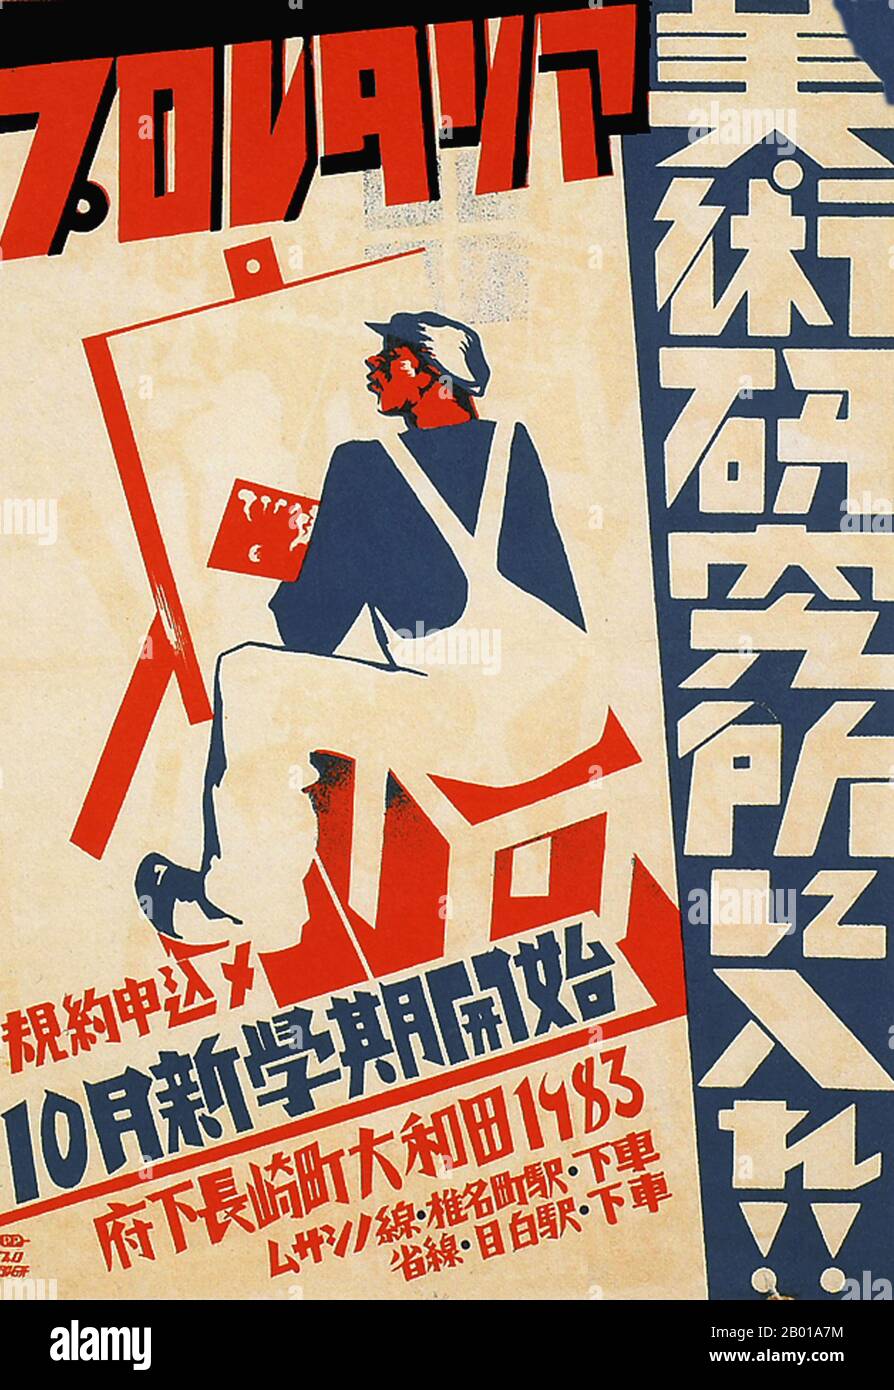 Japan: Poster for the Proletarian Art Institute, c. 1930.  During late 1920s and 1930s Japan, a new poster style developed that reflected the growing influence of the masses in Japanese society. These art posters were strongly influenced by the emerging political forces of Communism and Fascism in Europe and the Soviet Union, adopting a style that incorporated bold slogans with artistic themes ranging from Leftist socialist realism through Stateism and state-directed public welfare, to Militarism and Imperialist expansionism. Stock Photo